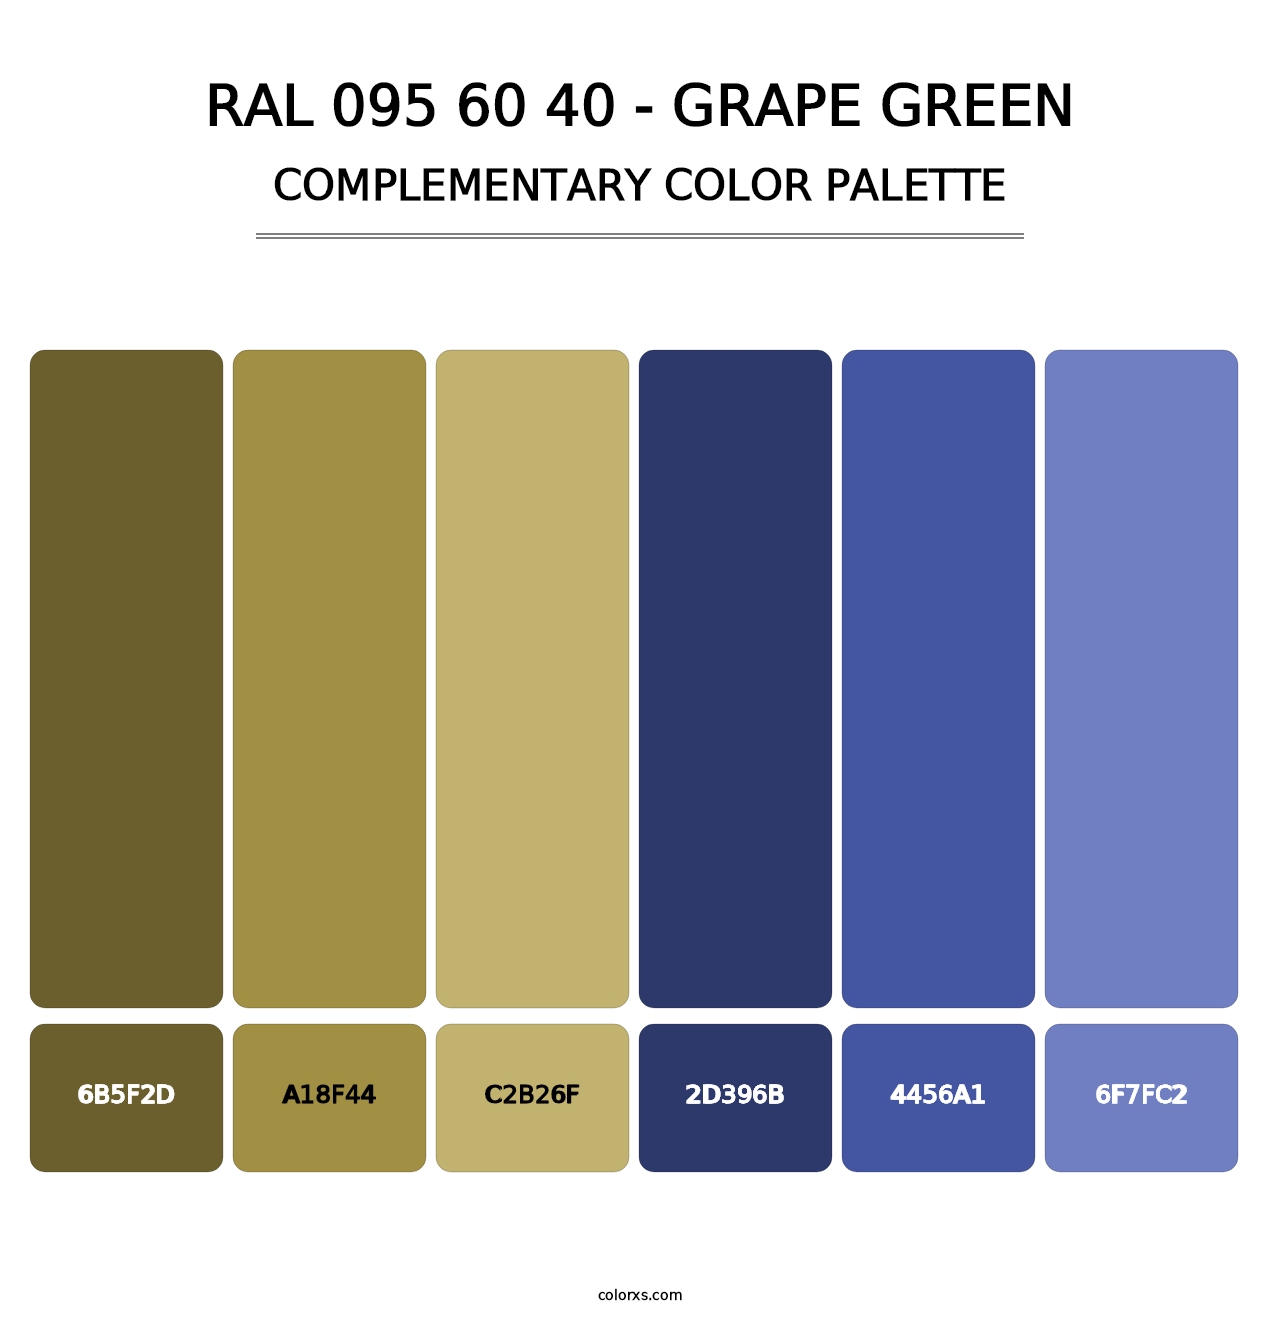 RAL 095 60 40 - Grape Green - Complementary Color Palette